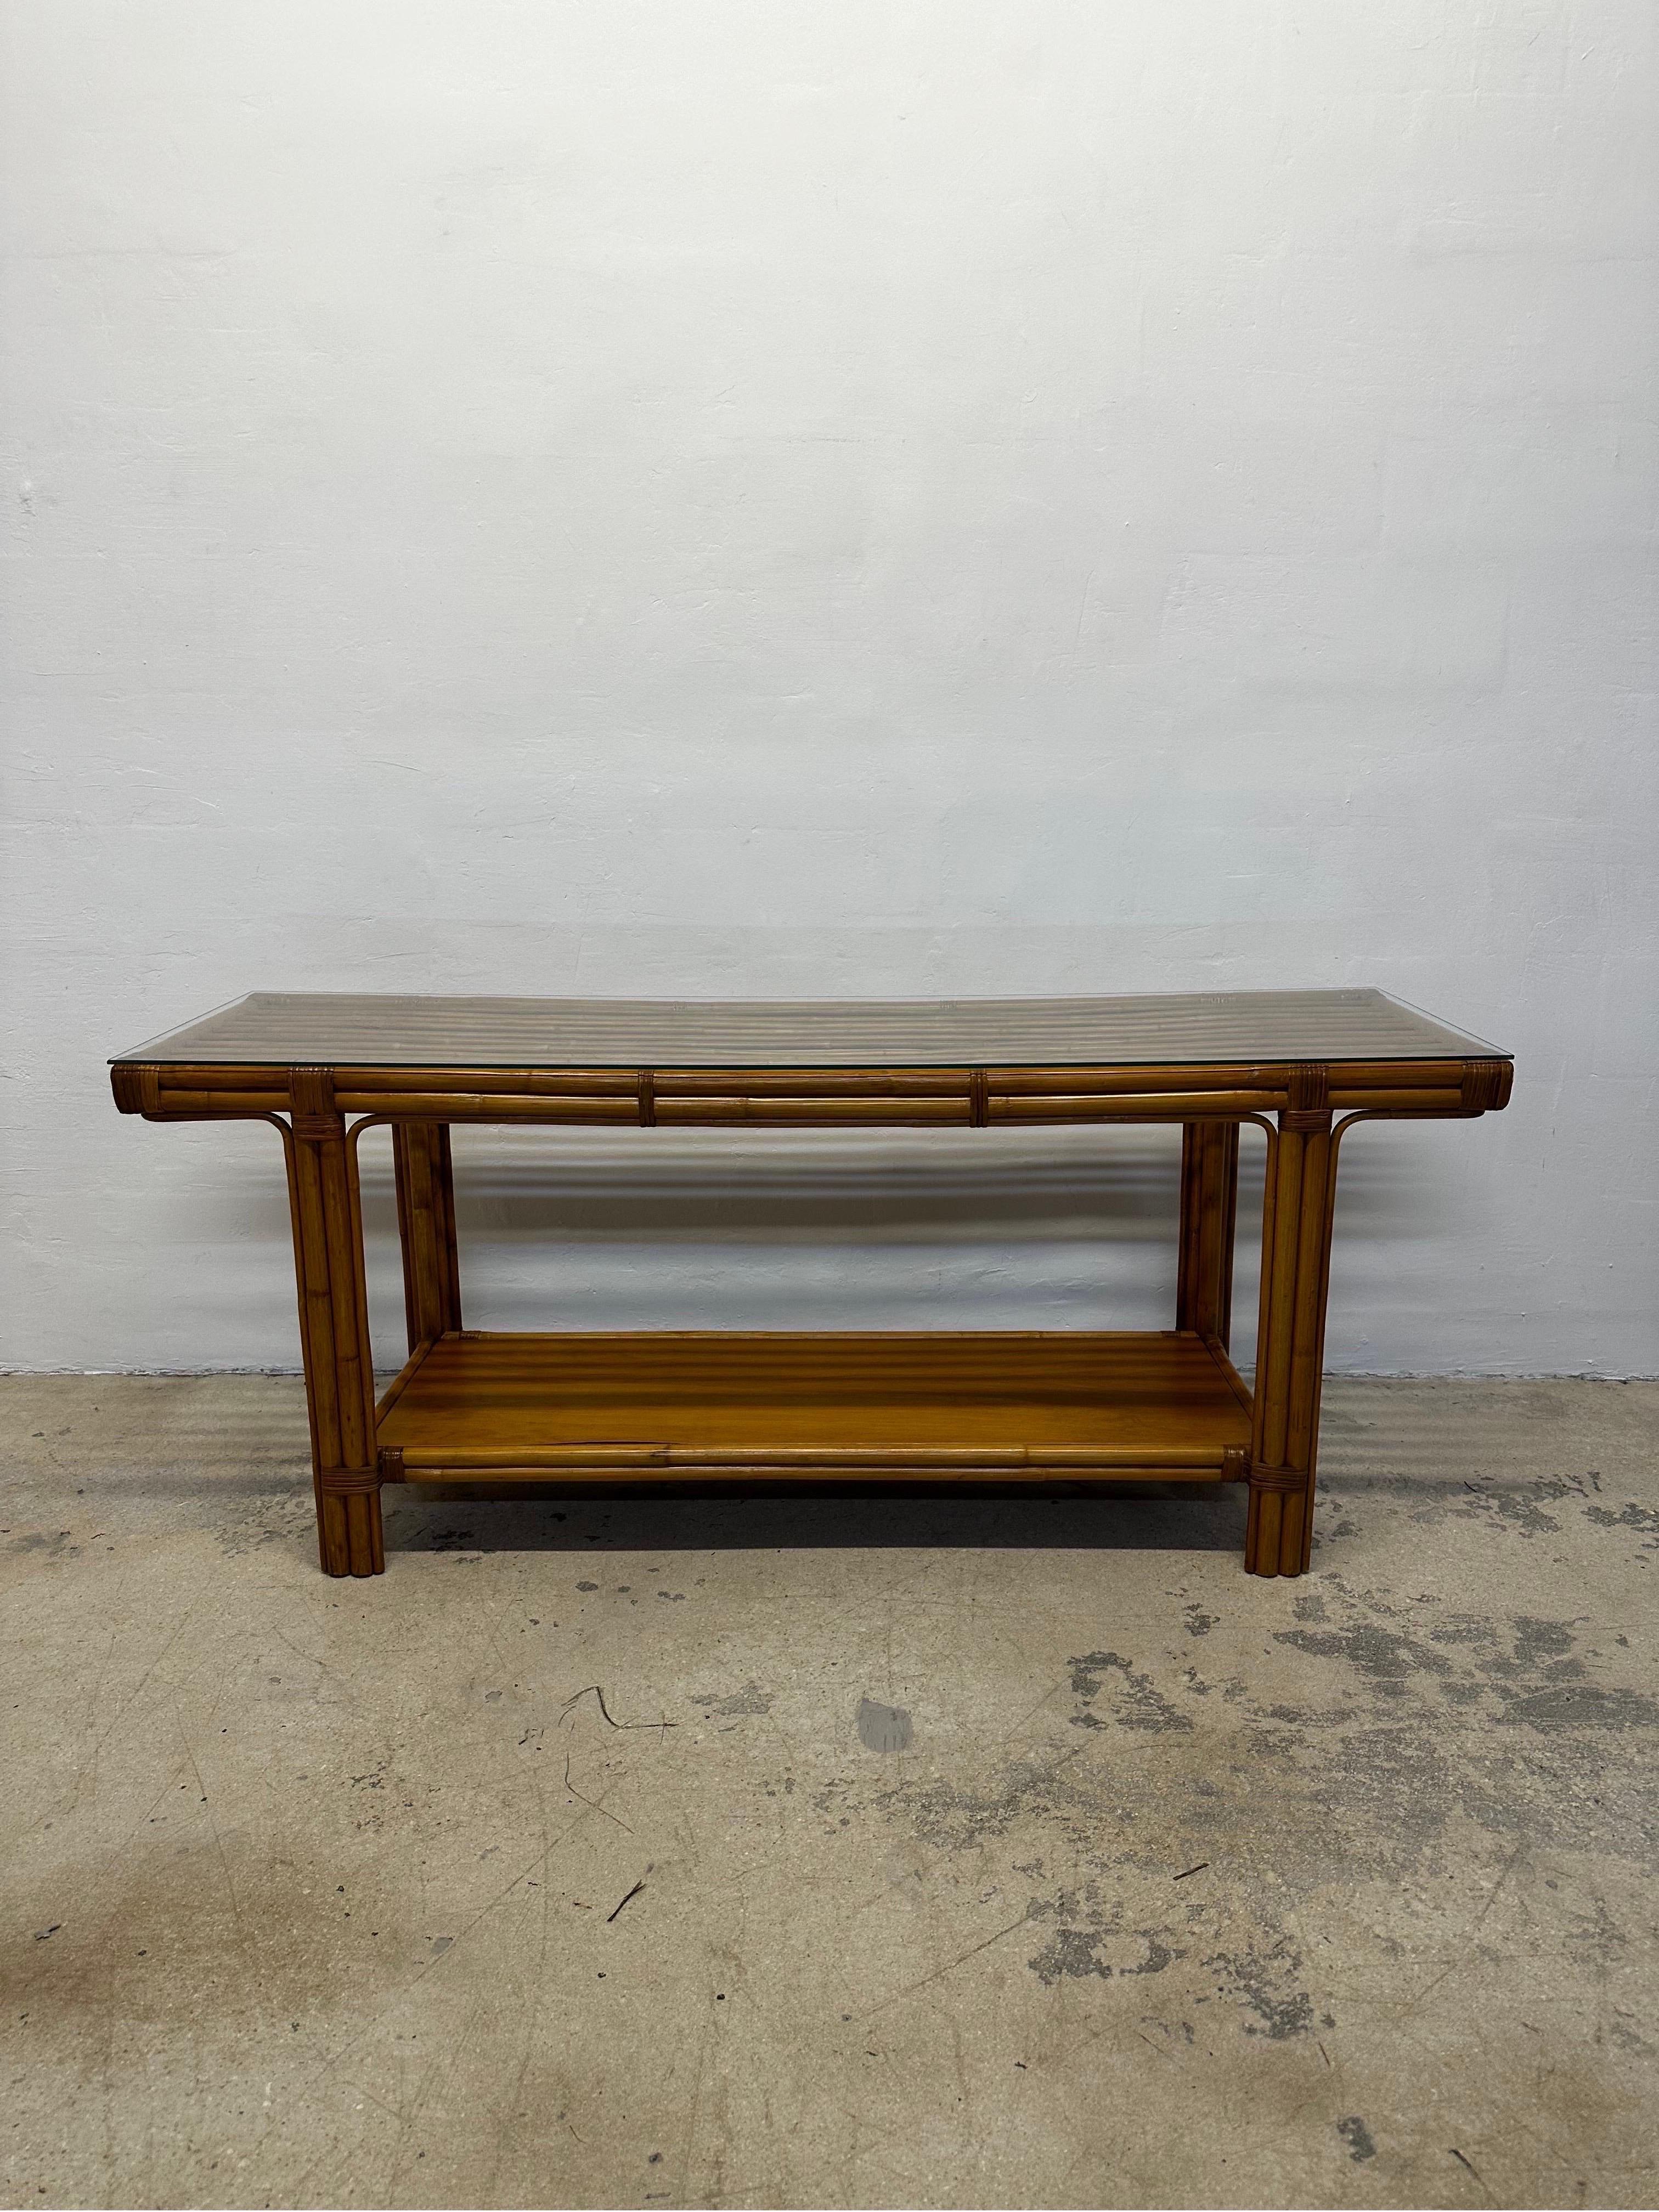 Mid-Century natural bamboo and glass top console table by Calif-Asia circa 1970s.  The bamboo base as well as wood shelf has been expertly restored and the 1/4” glass top is new.